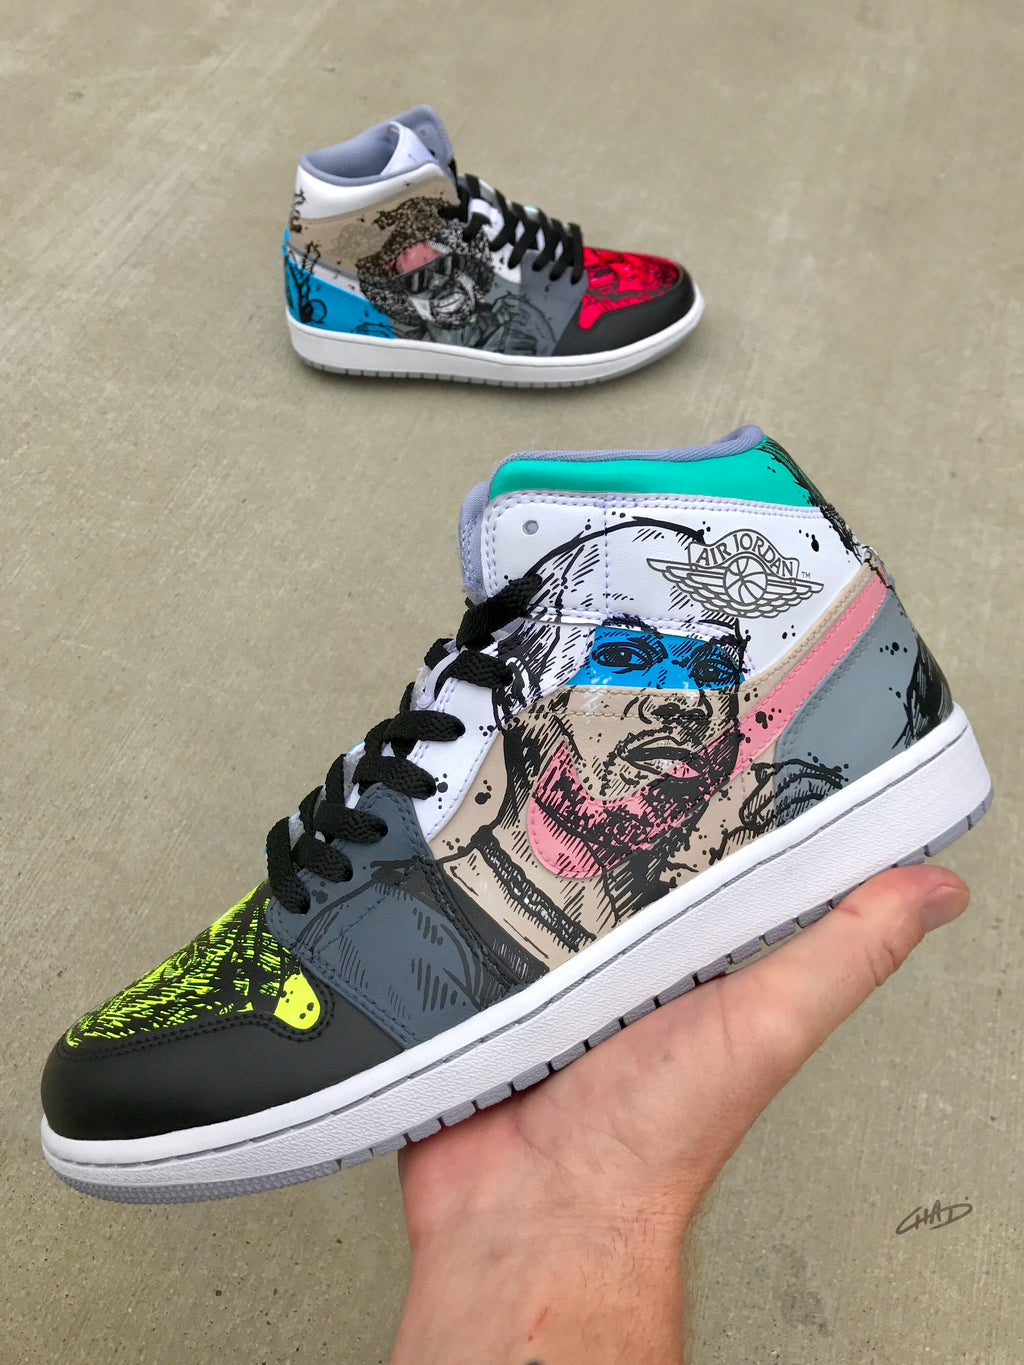 Worlds Best Custom Hand Painted Shoes Nike Adidas Vans And More